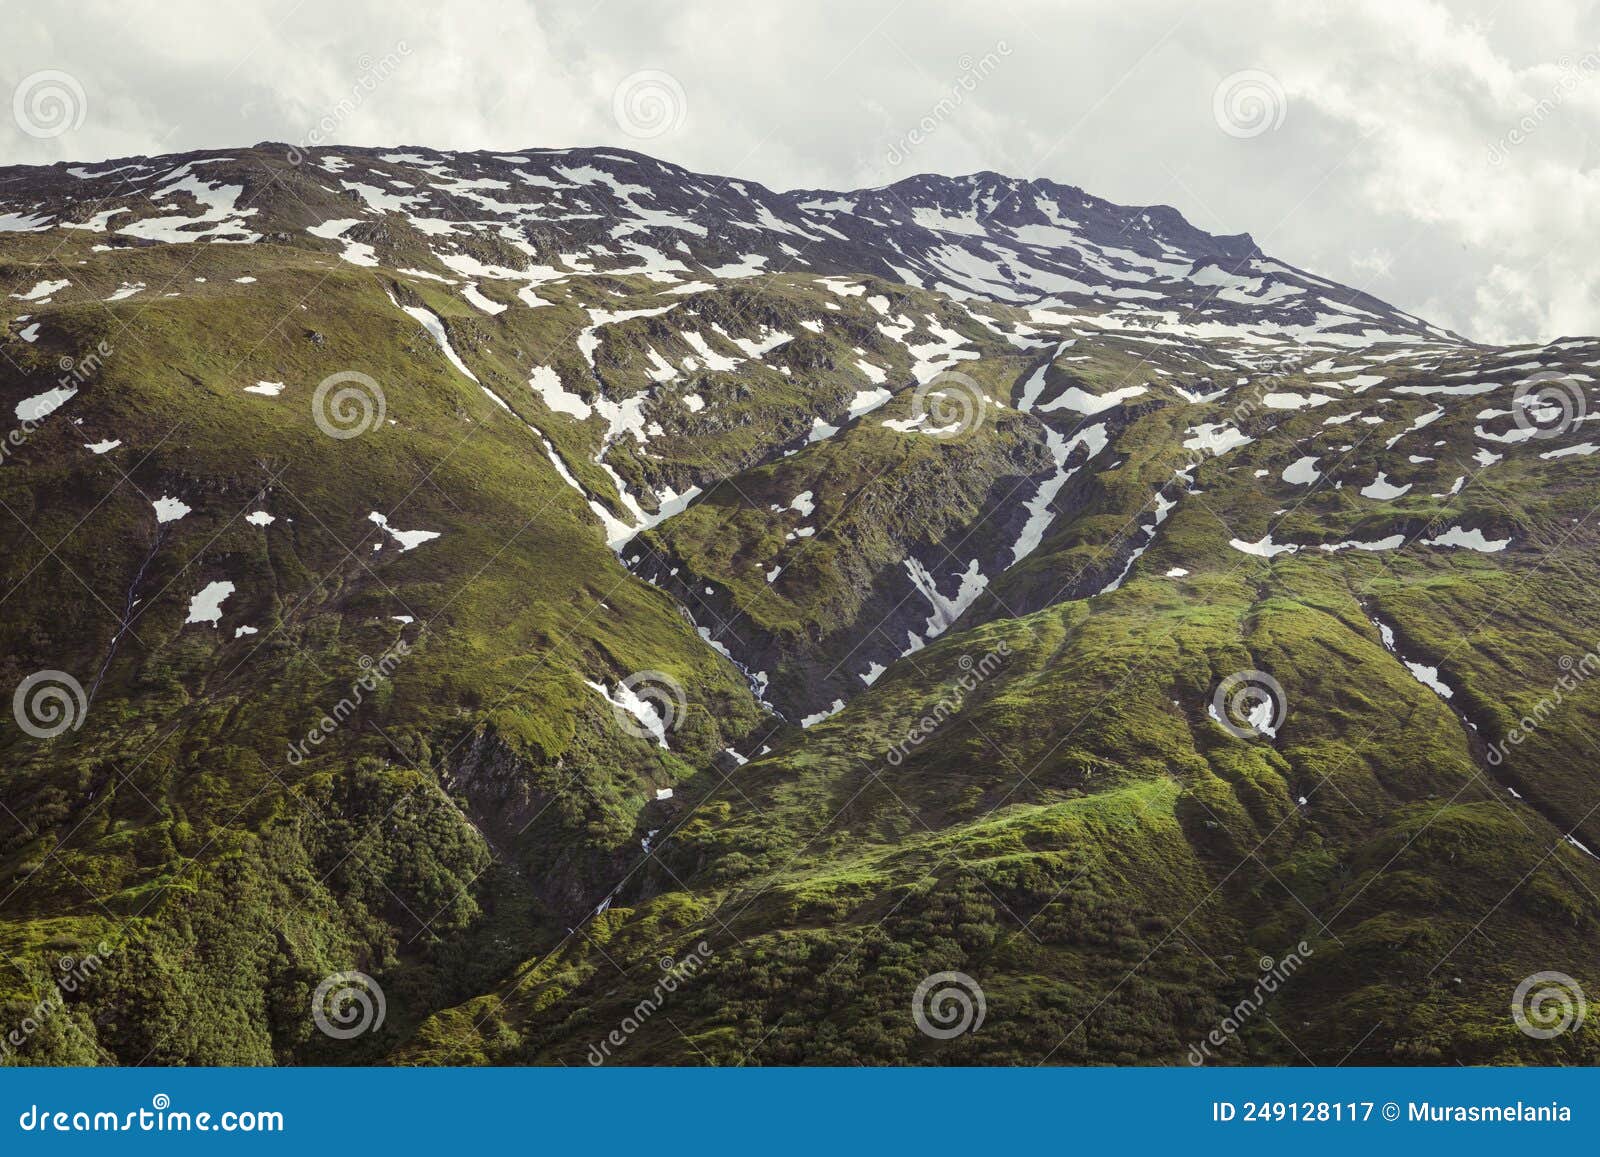 Juicy Green Slope Of A Mountain Overgrown With Dense Vegetation With